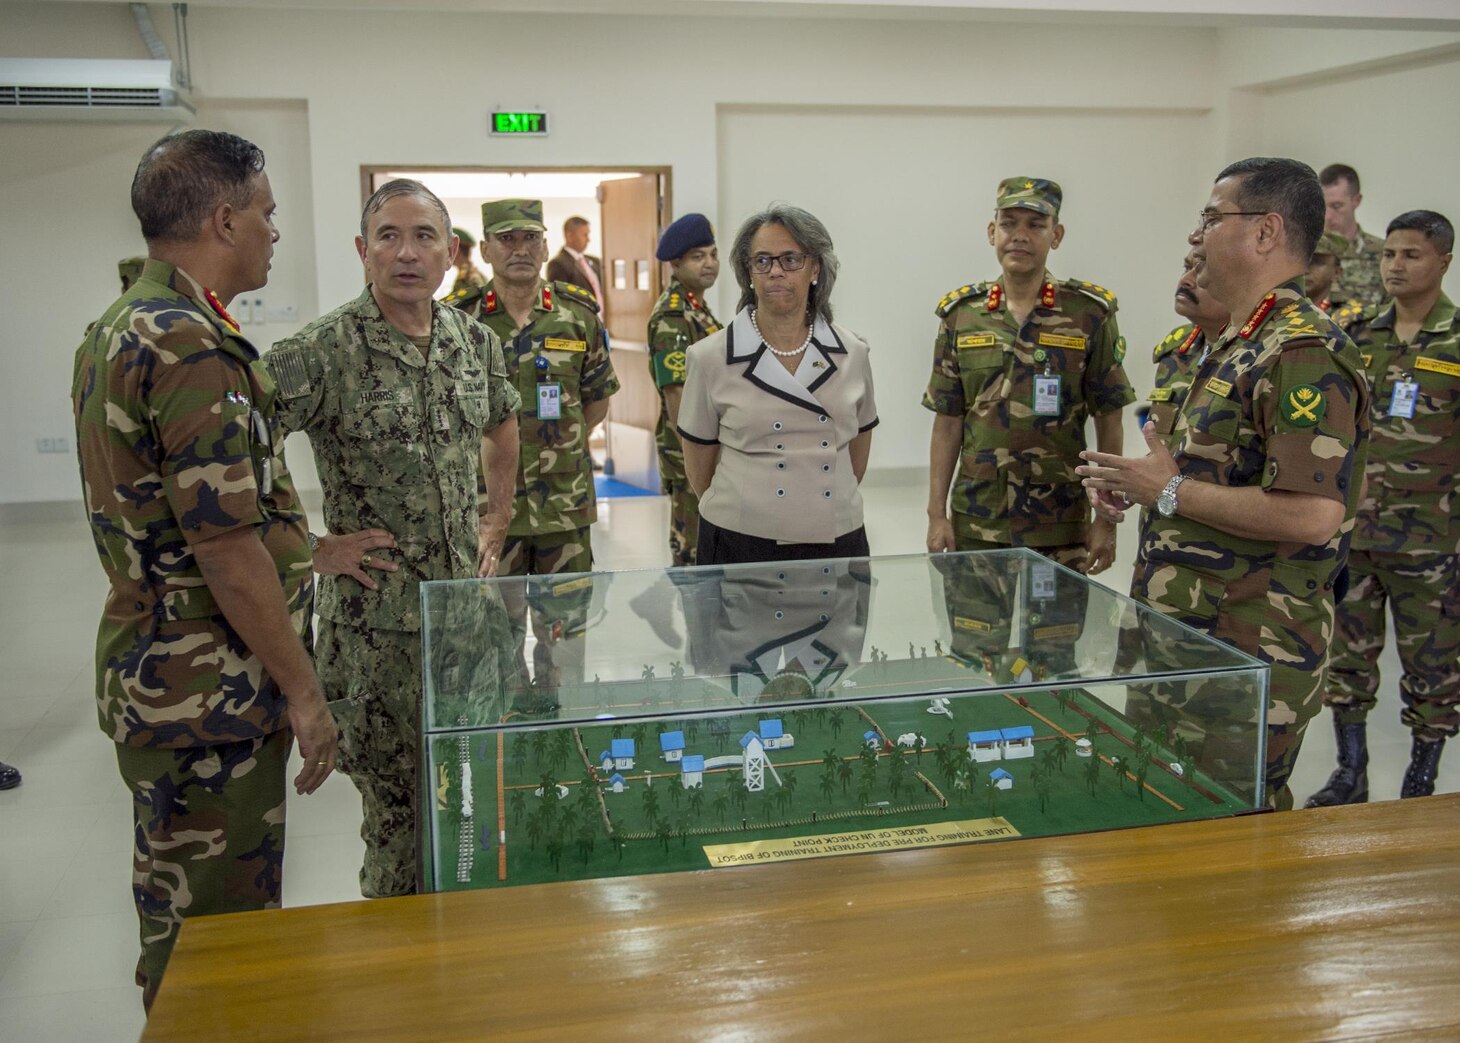 170708-N-WY954-433GAZIPUR, BANGLADESH (July 8, 2017) – Adm. Harry Harris, Commander U.S. Pacific Command (PACOM), center-left, and U.S. Ambassador to Bangladesh Marcia Bernicat, center-right, are given a tour of the Wargame Room at the $3.6 million new multipurpose training facility at the Bangladesh Institute of Peace Support Operations Training (BIPSOT) by BIPSOT Commandant of the, Maj. Gen. Enayet Ullah, right, and Bangladesh Chief of Army Staff Gen. Belal, left. This is Harris’ first visit to Bangladesh as PACOM commander. During the visit he met with counterparts and government officials for discussions on military cooperation and regional security initiatives in the Indo-Asia Pacific. (U.S. Navy photo by Mass Communications Specialist 2nd Class Robin W. Peak/ Released)